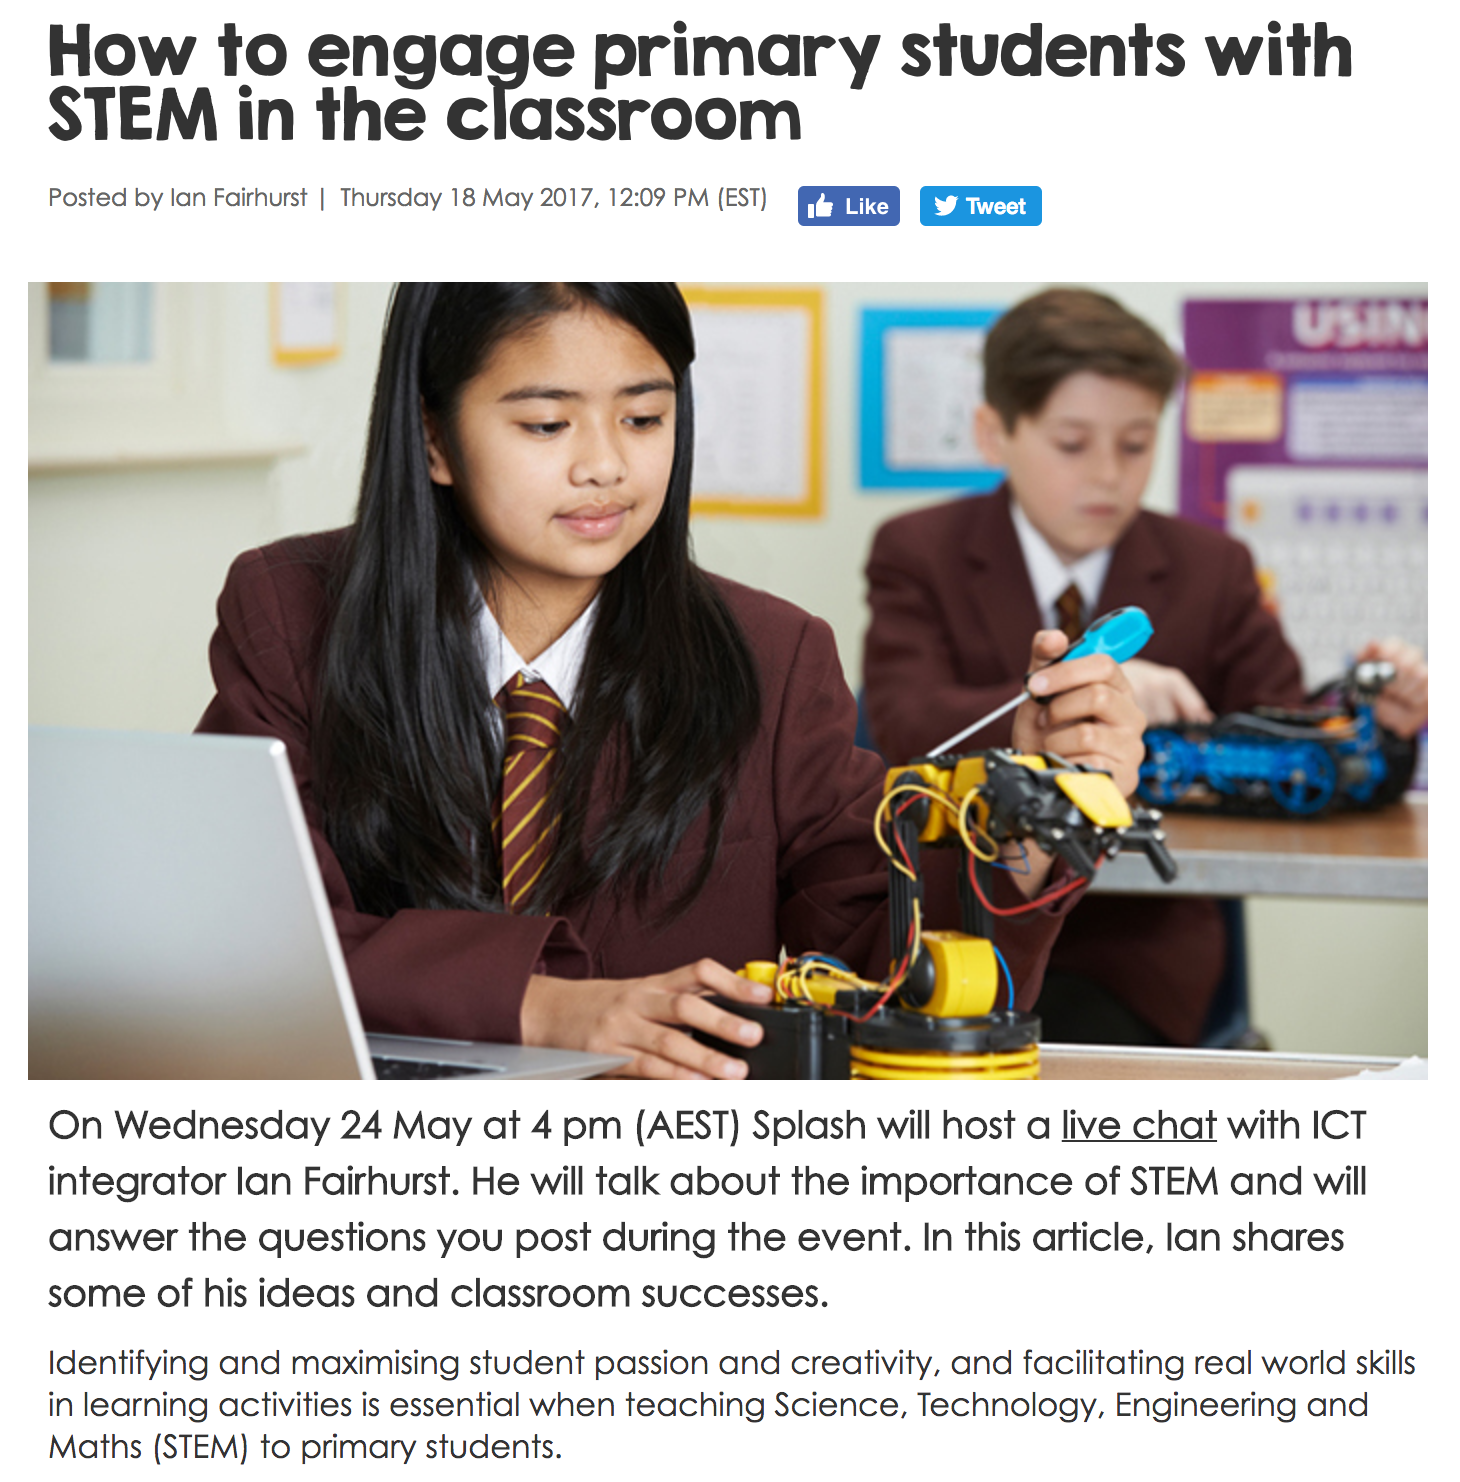 How to engage primary students with STEM